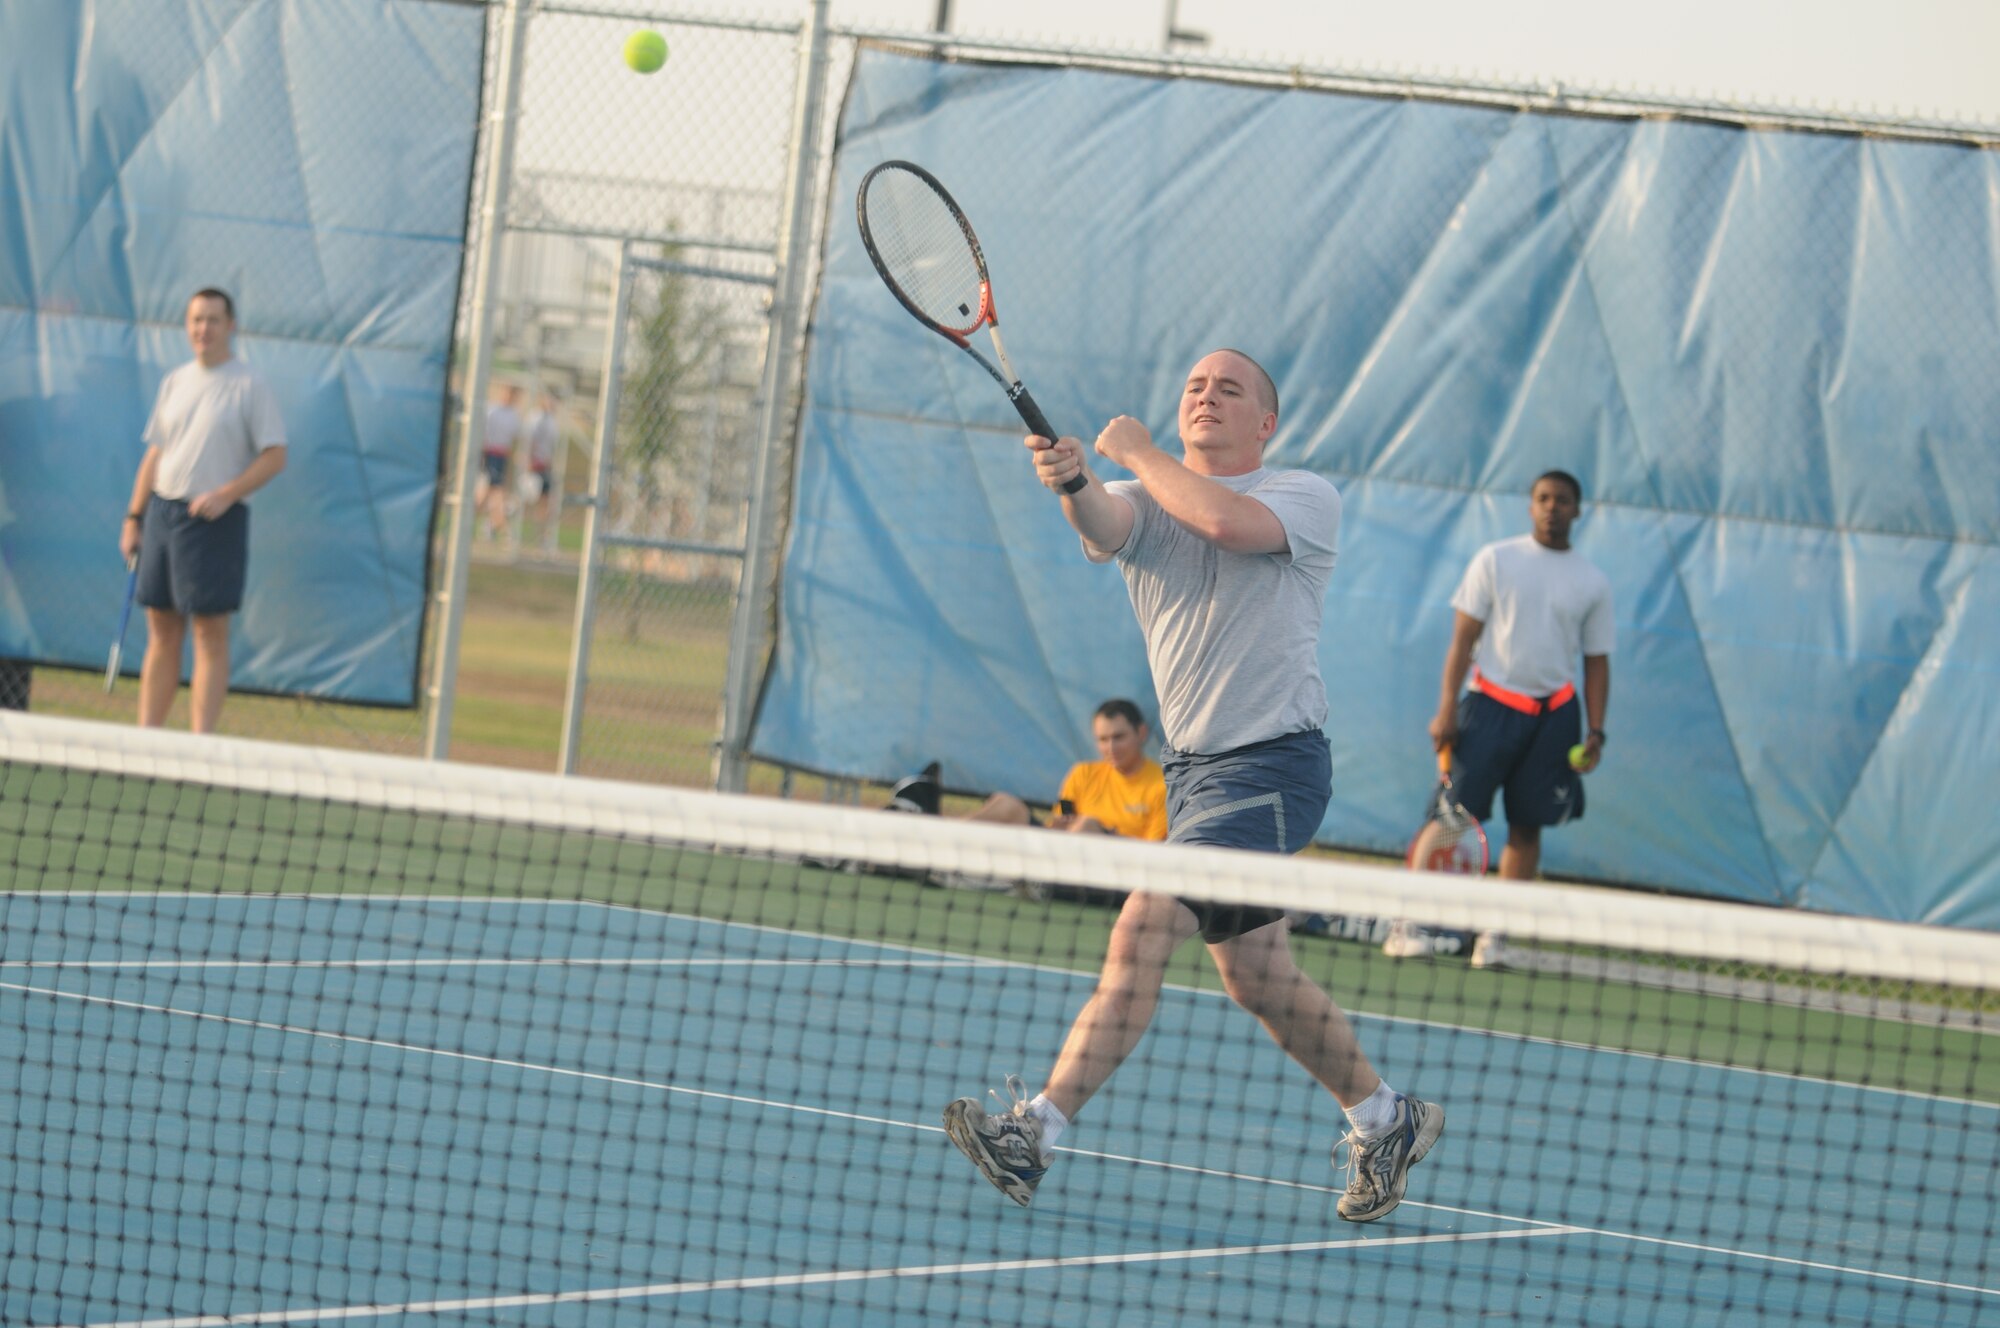 GOODFELLOW AIR FORCE BASE, Texas - Senior Airman John Yarbrough, 17th Communications Squadron plays in a tennis tournament May 27. Team Goodfellow devoted the day to safety and sports to kick off the 101 critical days of summer. (U.S. Air Force photo/Staff Sgt. Heather L Rodgers)